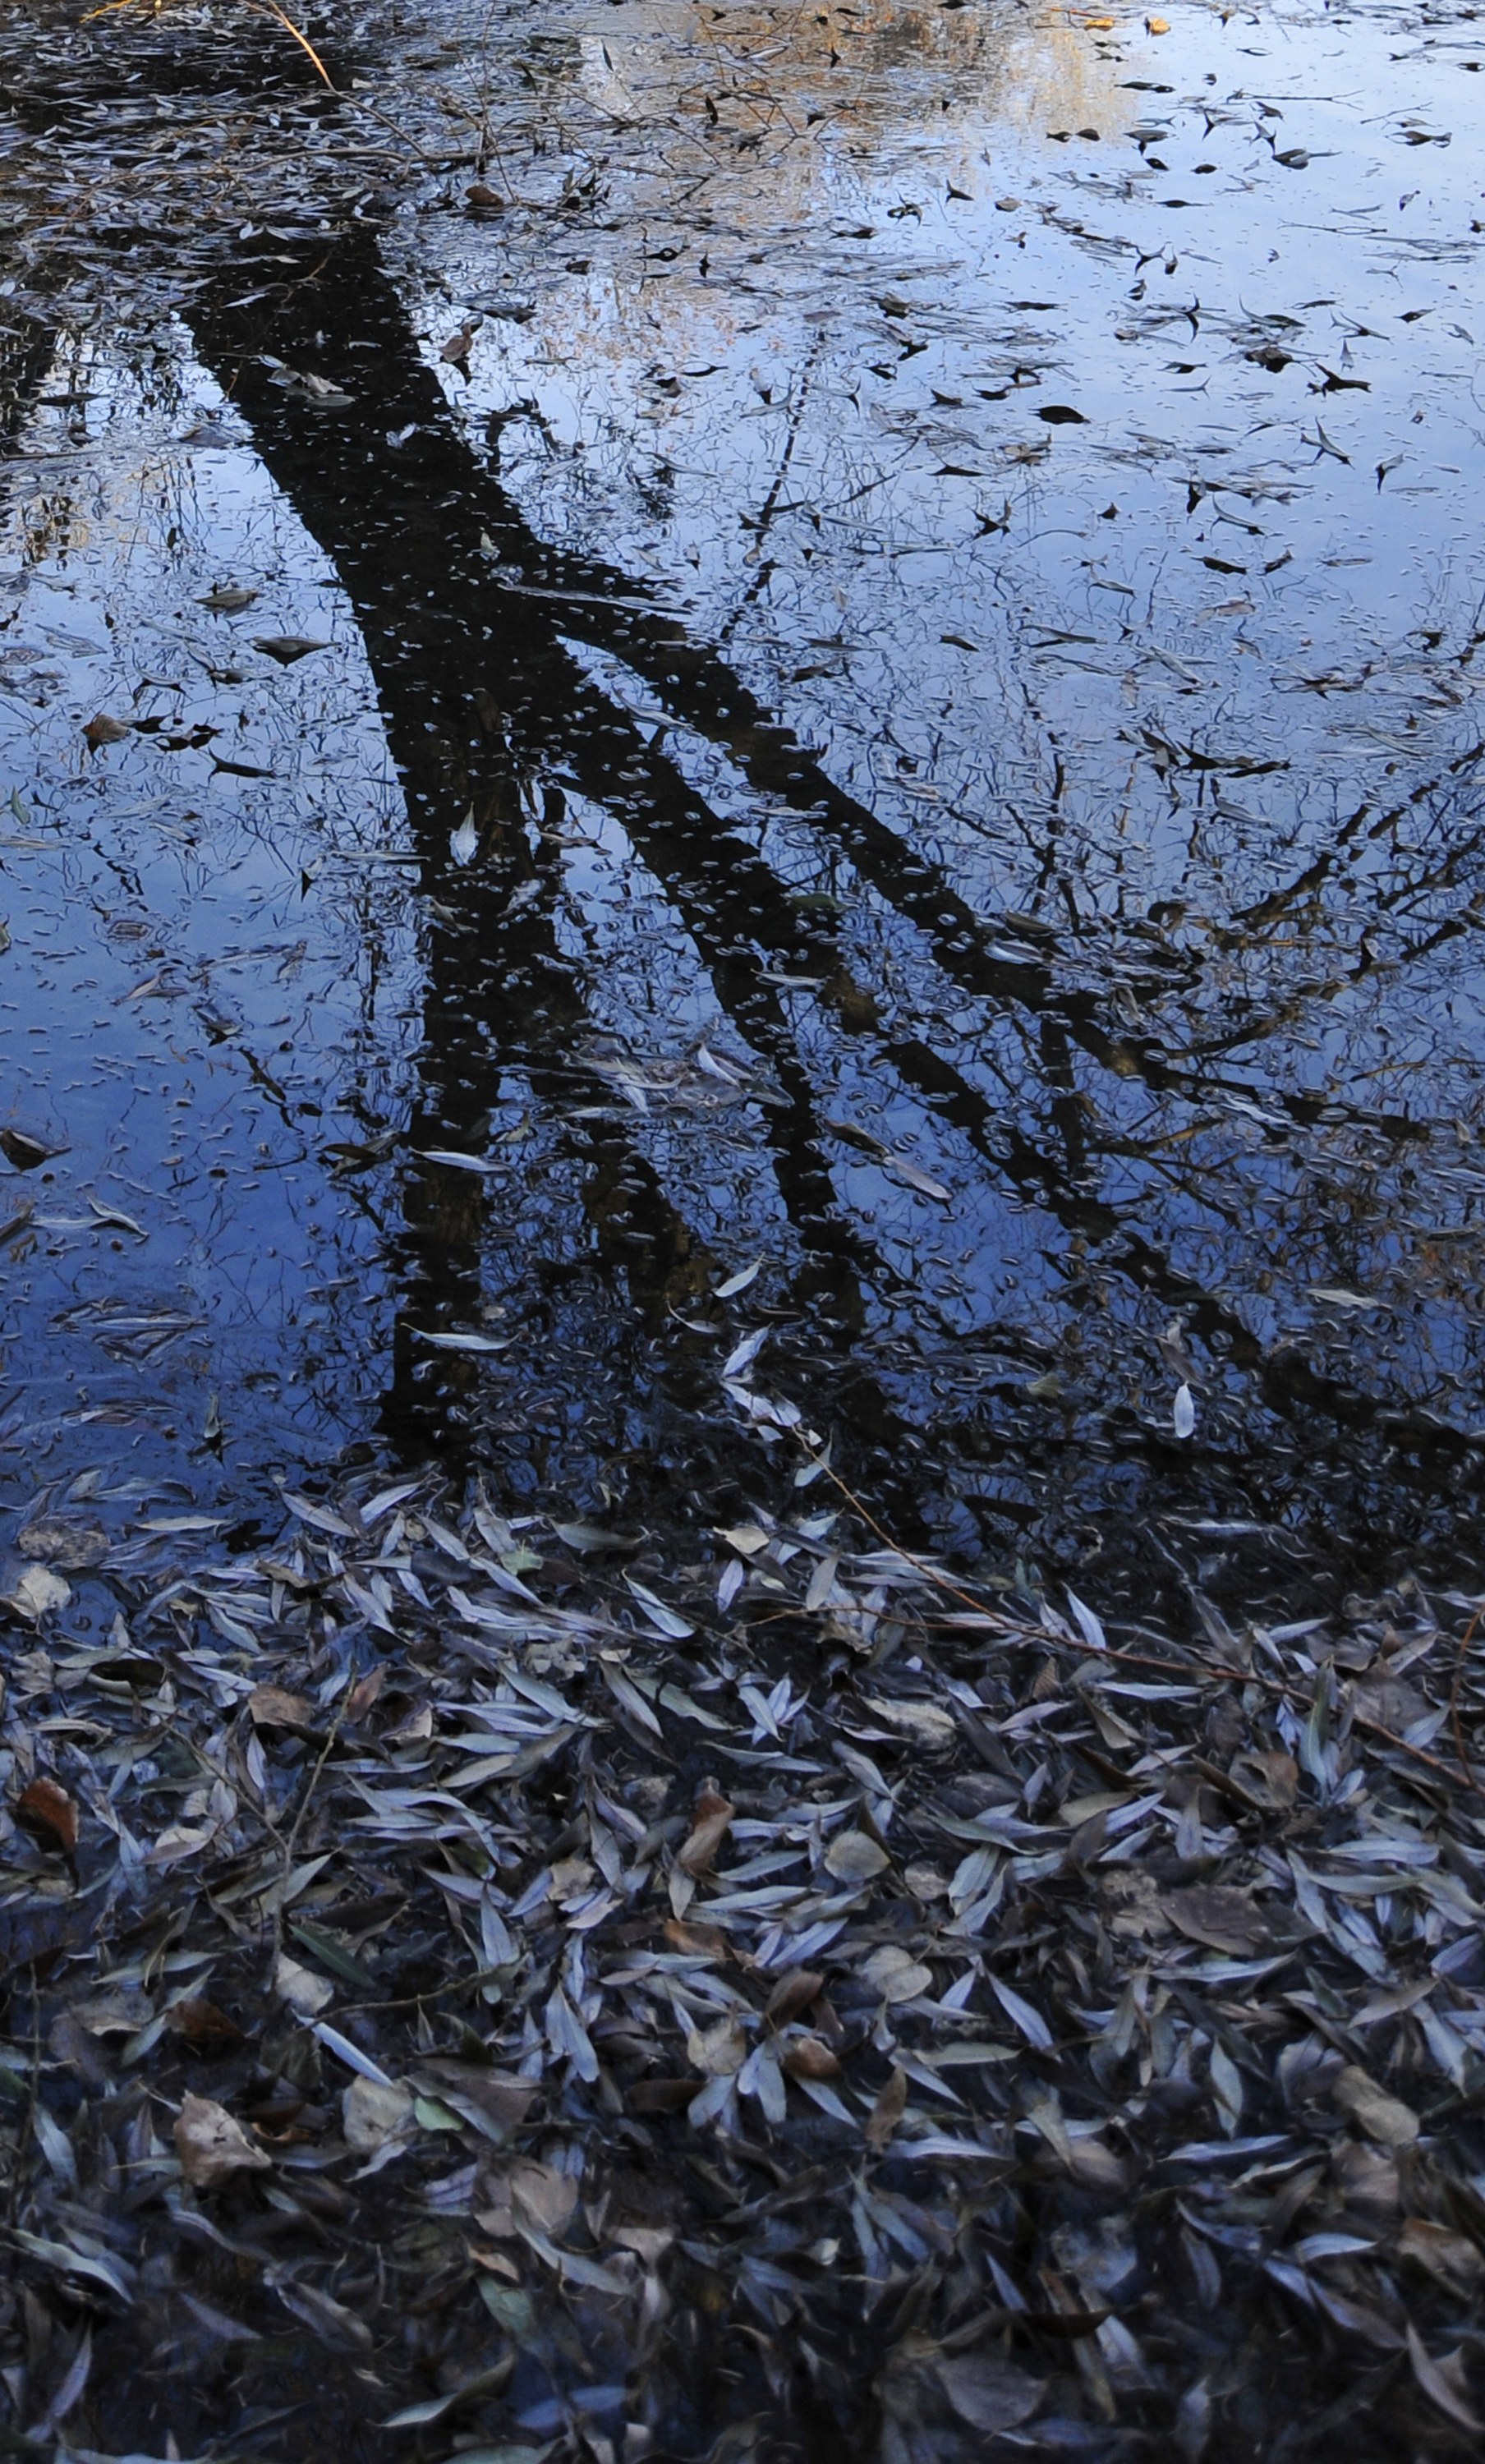 PICTURESQUE- Fallen leaves surround the top of a tree's watery reflection as if they were still attached.